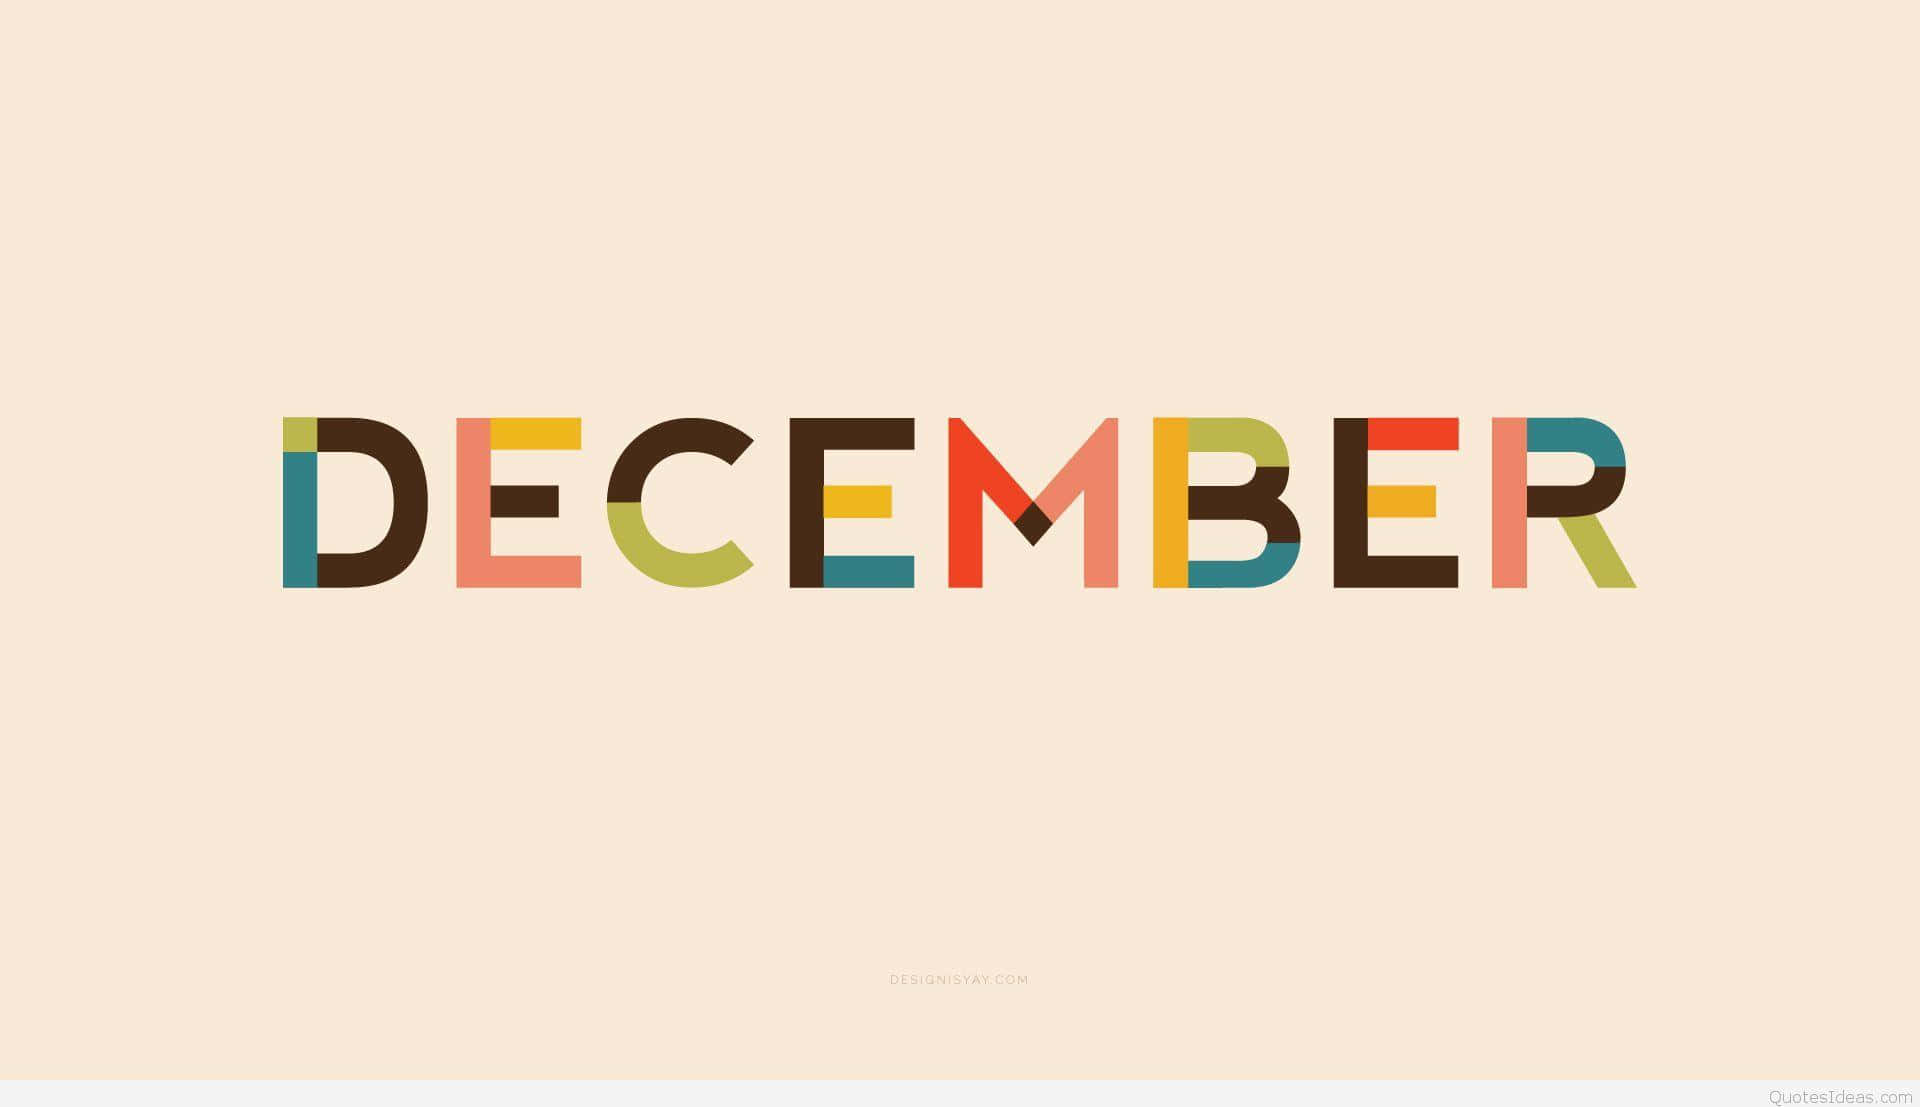 Let the holidays come alive with the beauty of December!